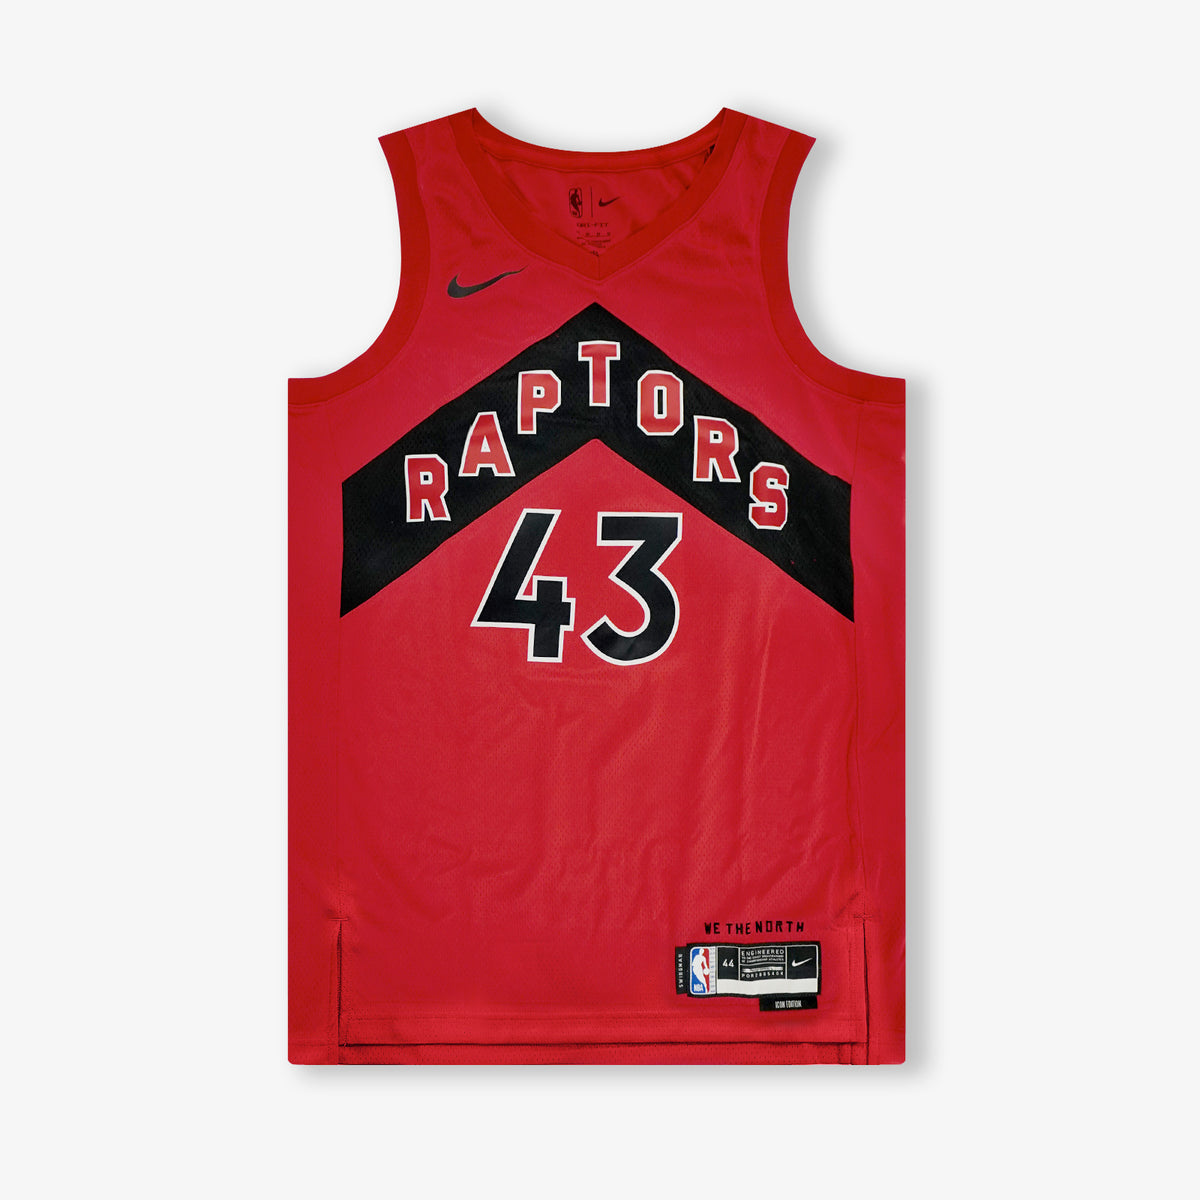 Official Toronto Raptors Authentic Jerseys, Official Nike Jersey